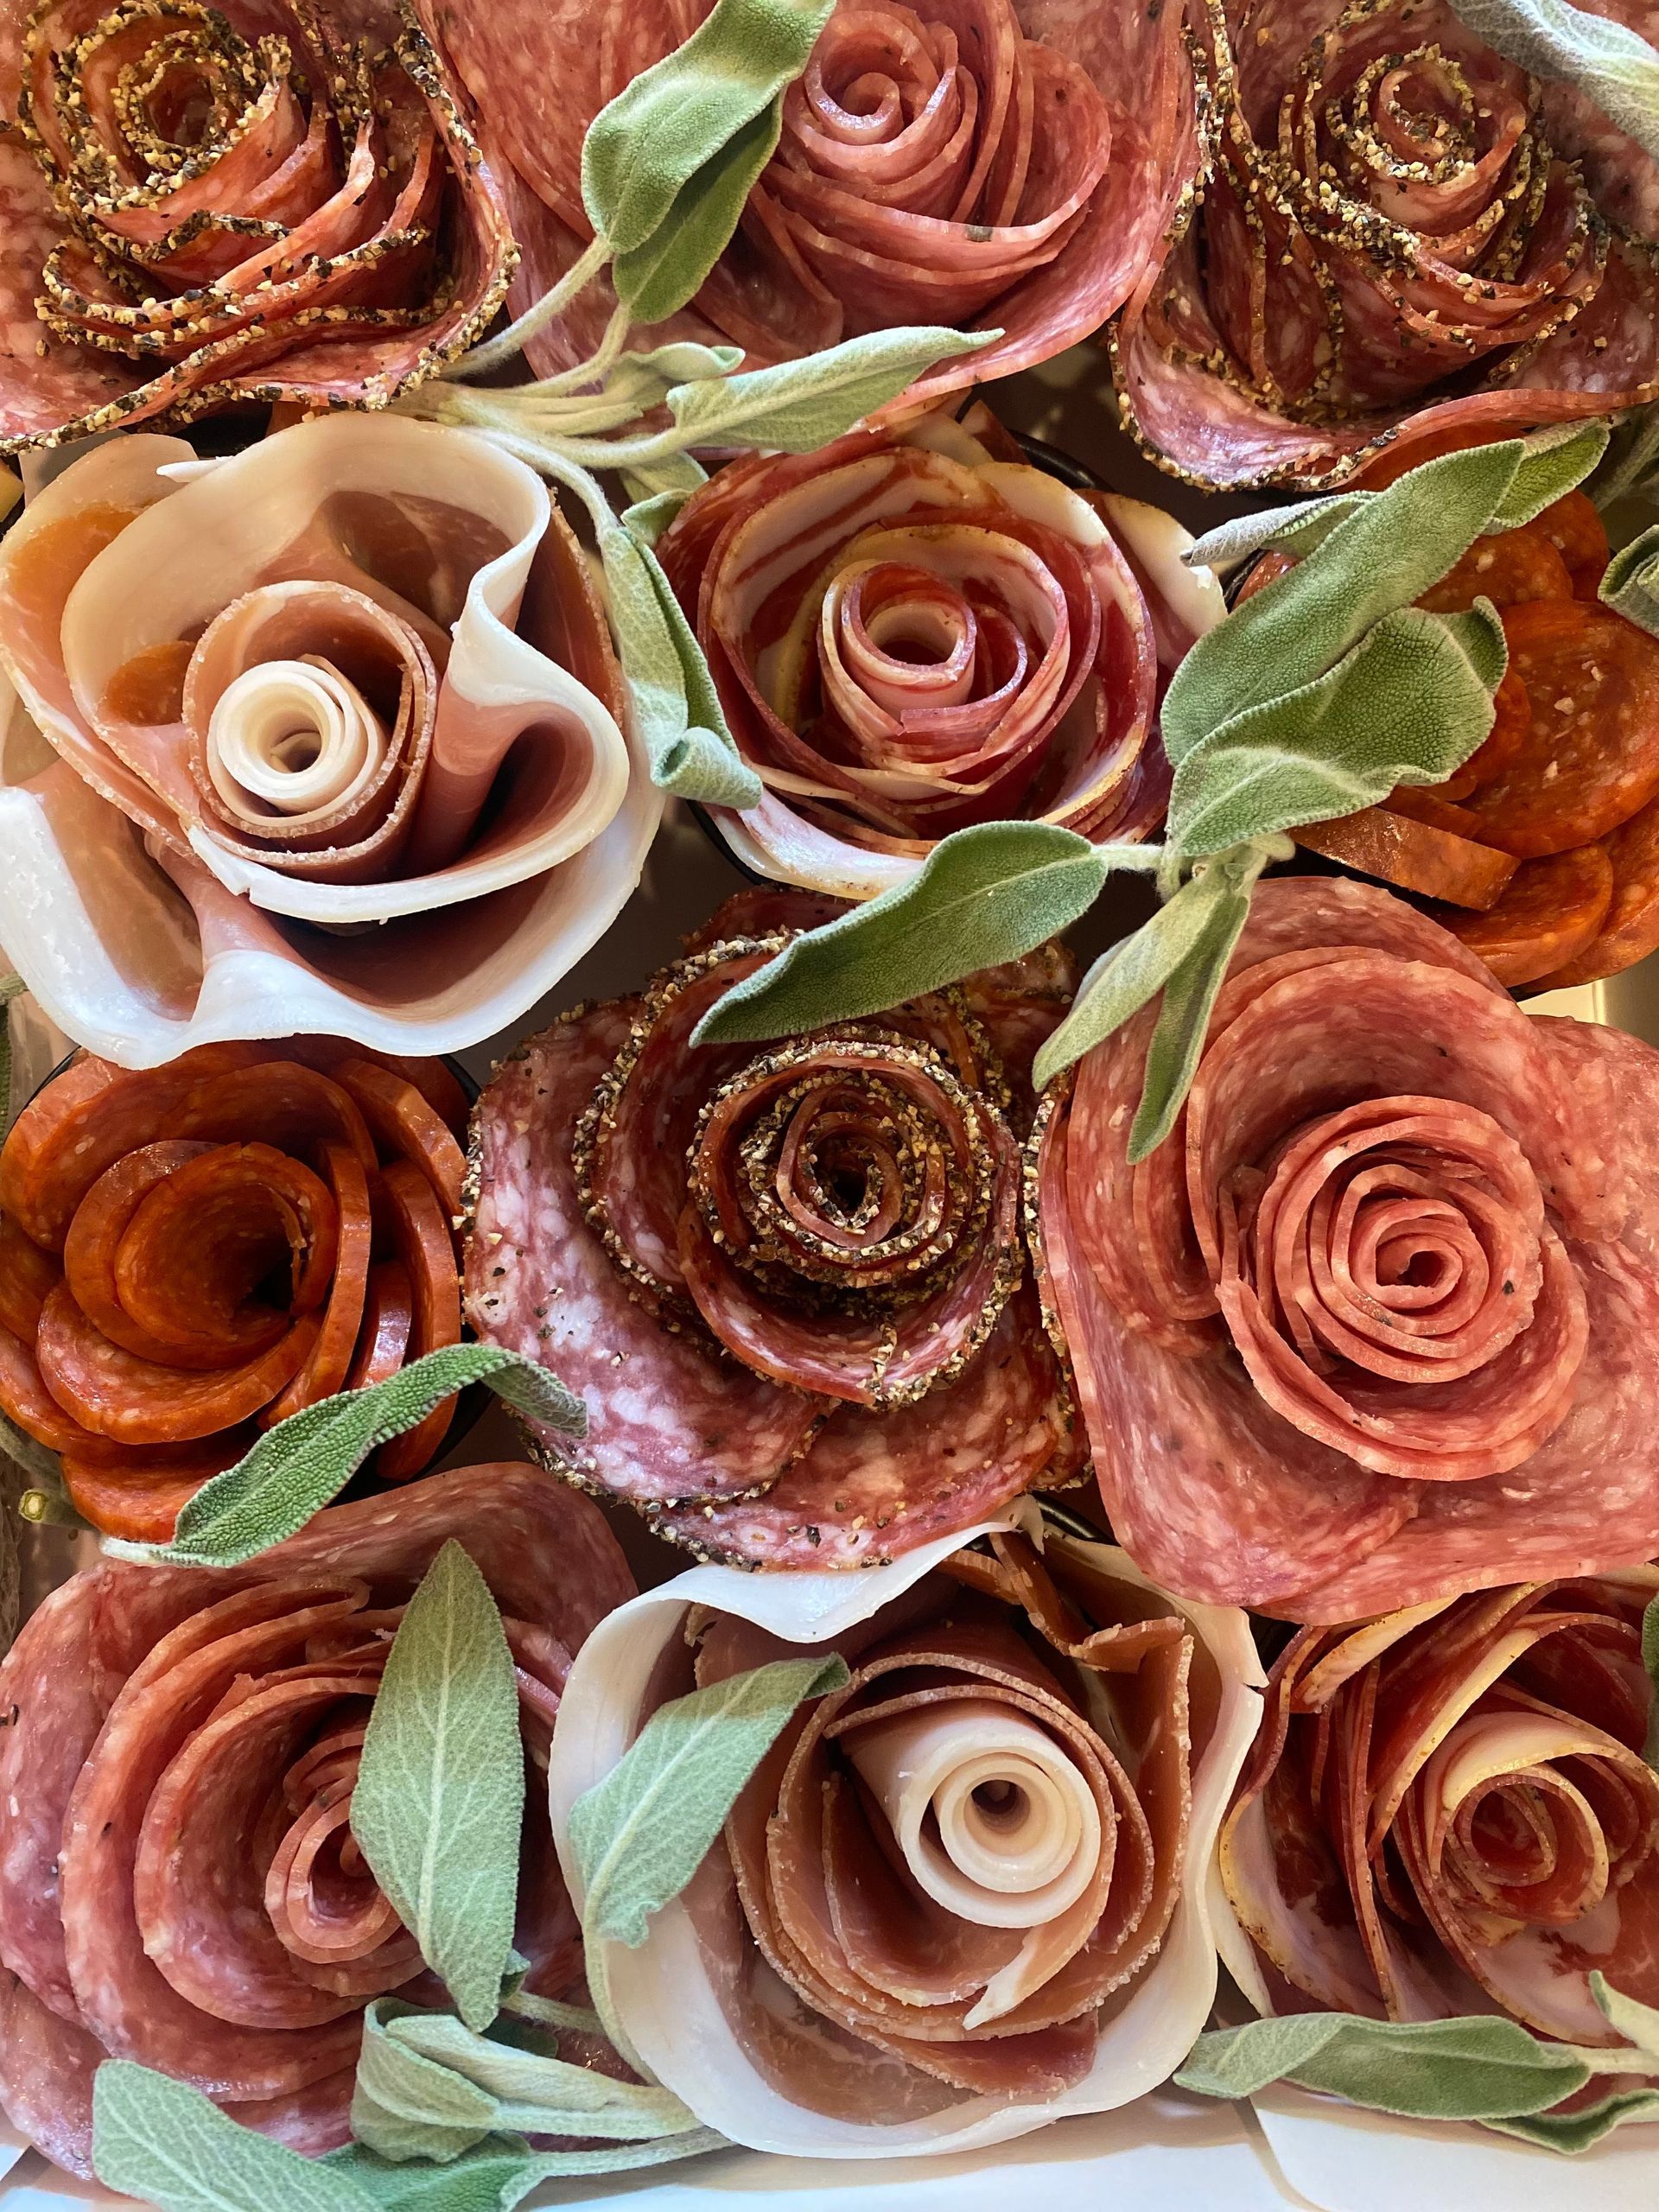 learn how to build a charcuterie rose